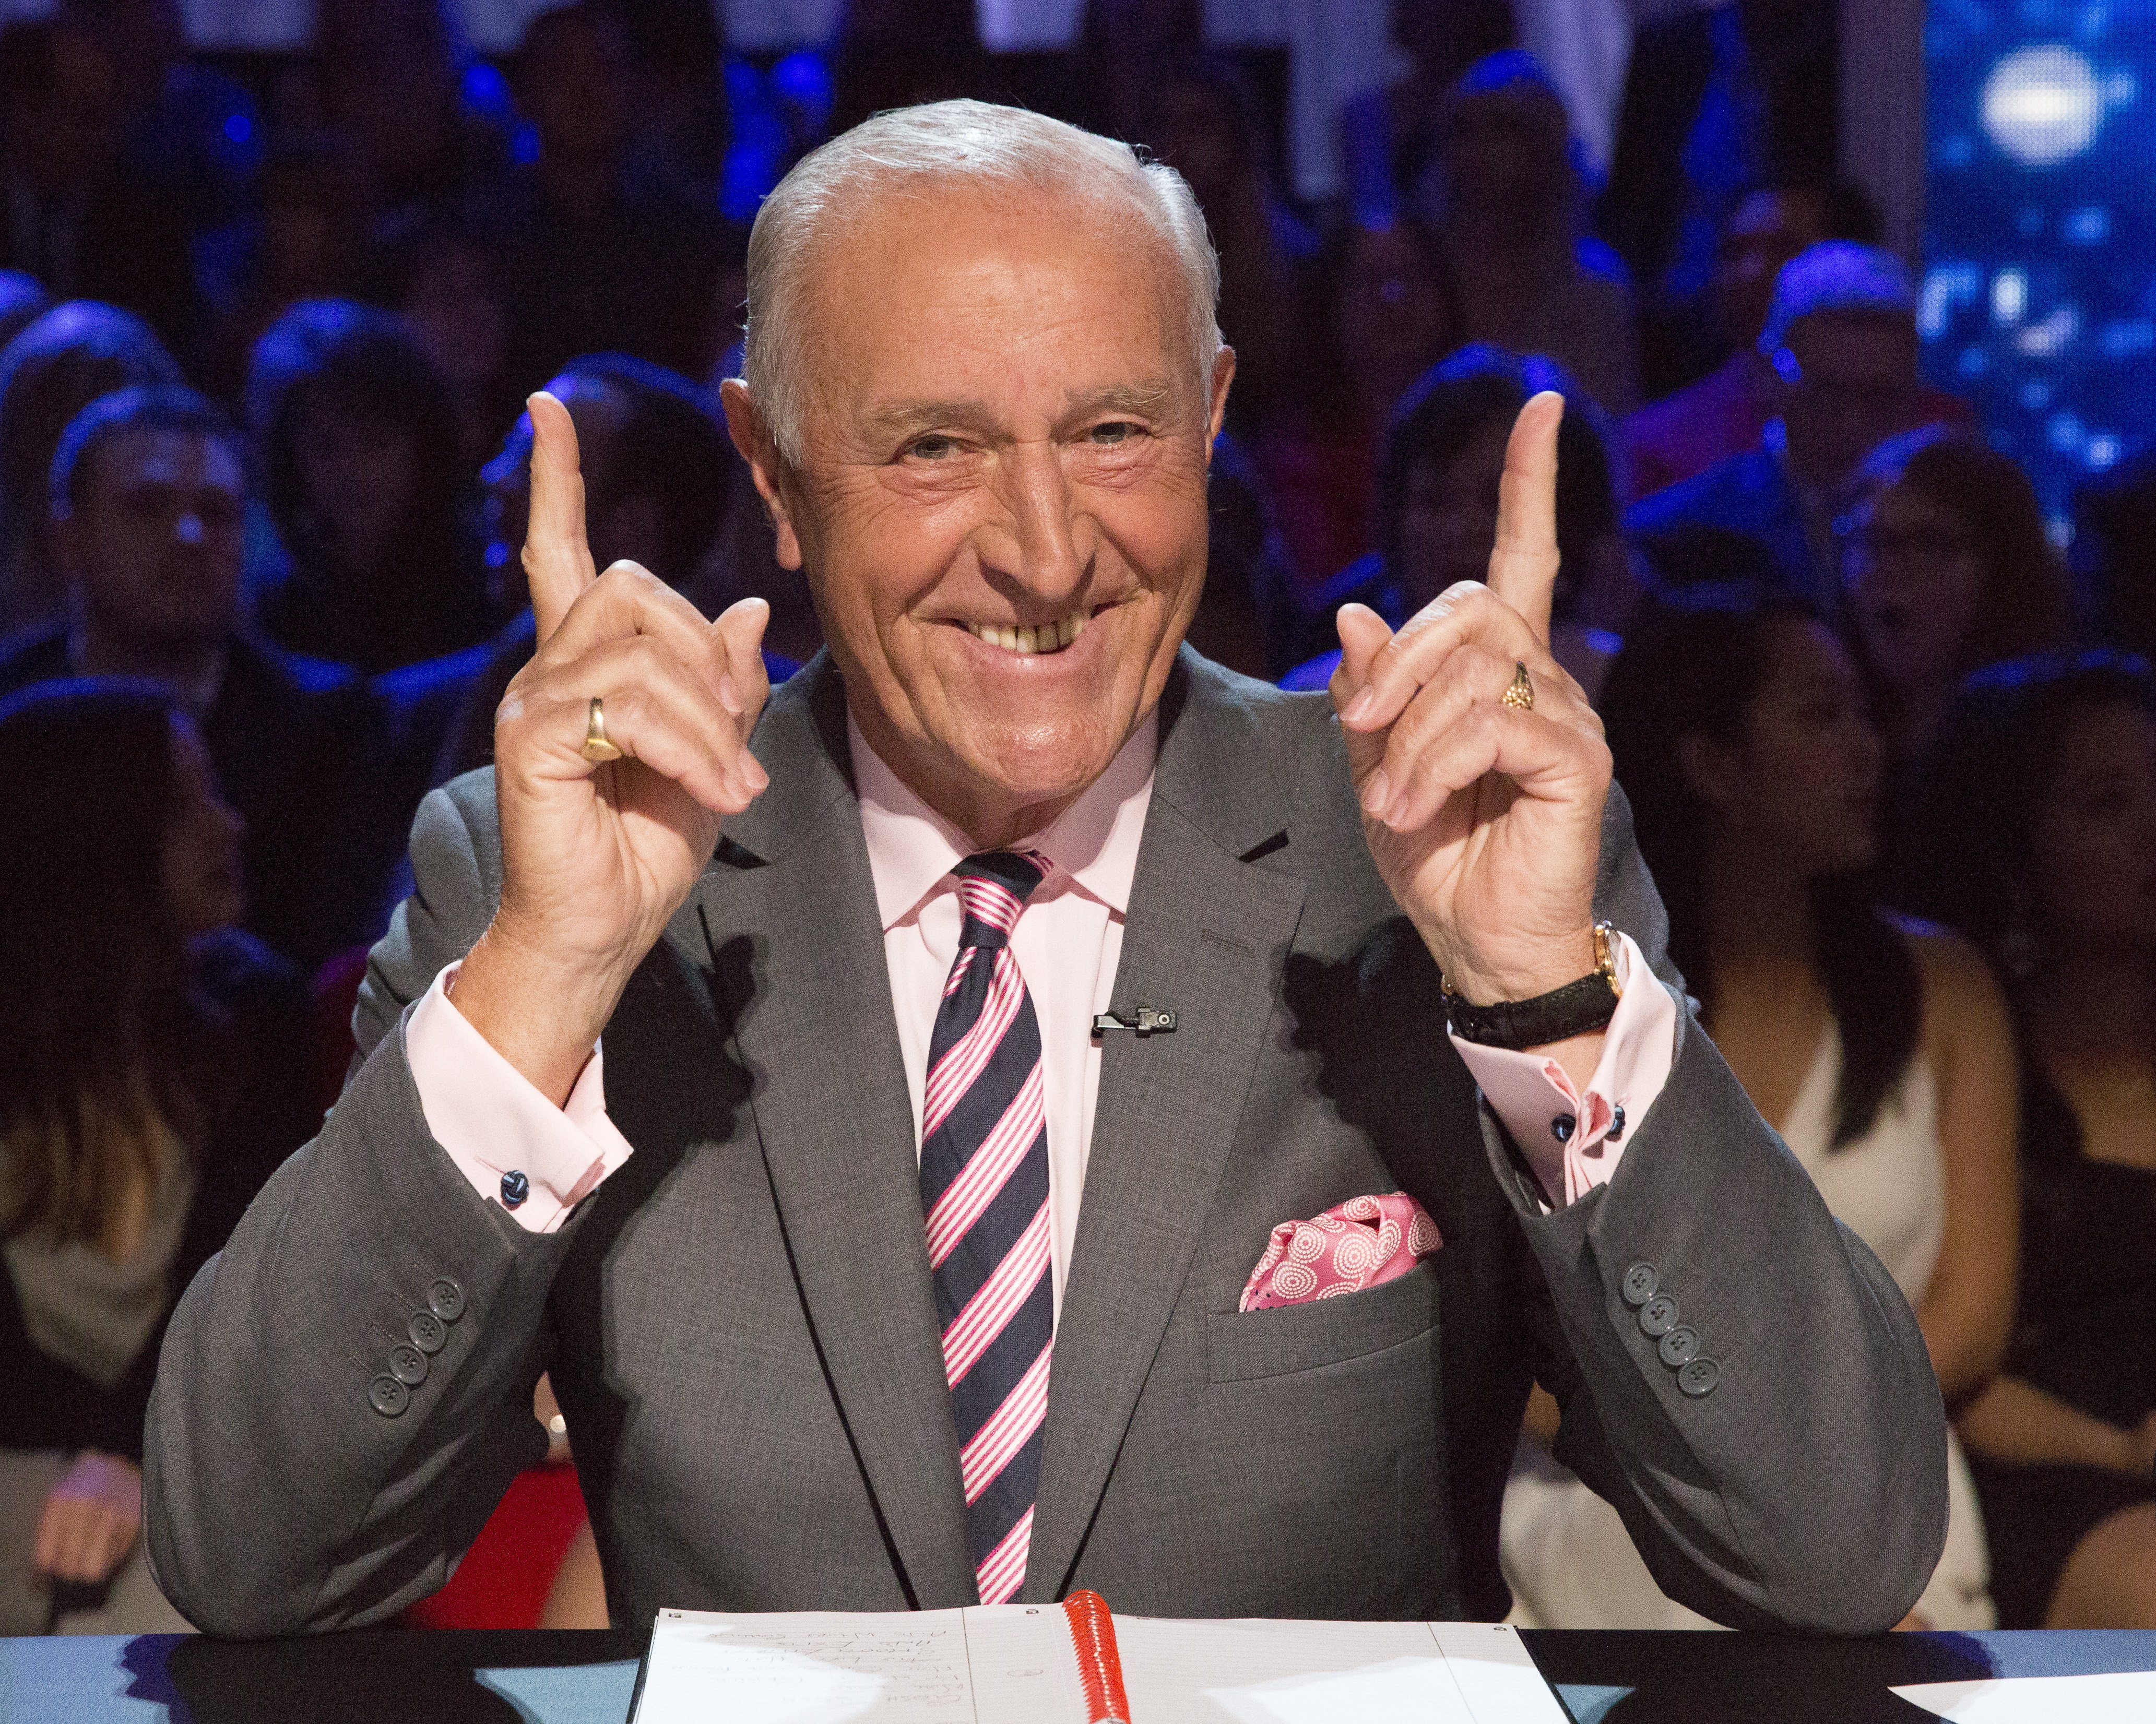 Len Goodman on the semi-final show of "Dancing with the Stars: Athletes," on May 14, 2018. | Source: Getty Images